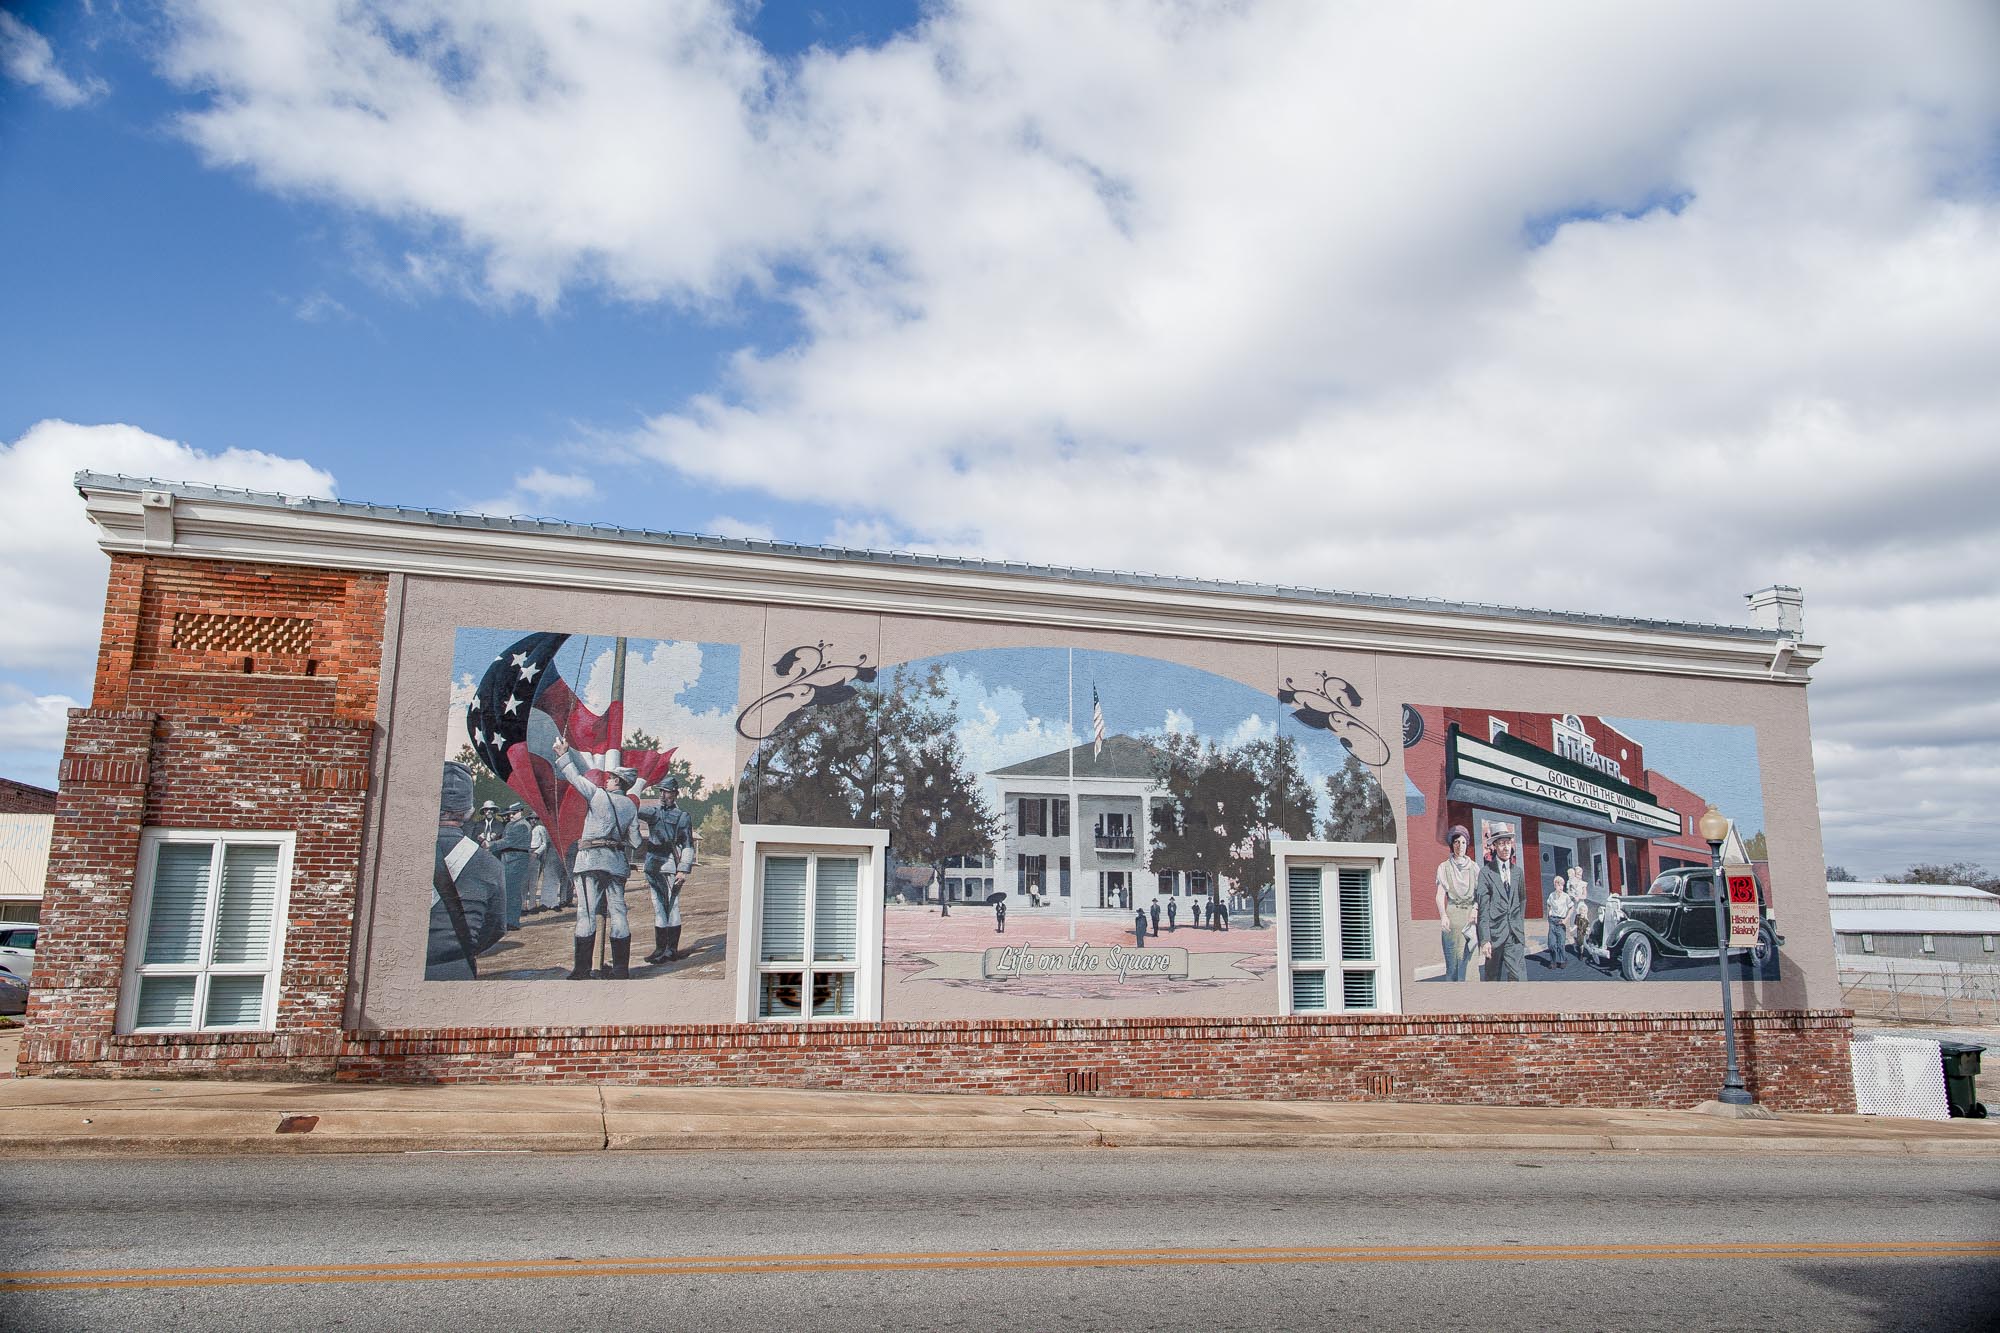 Muralist, Wes Hardin depicts days gone by on the Courthouse Square on the right corner as you approach from the north side of the square.